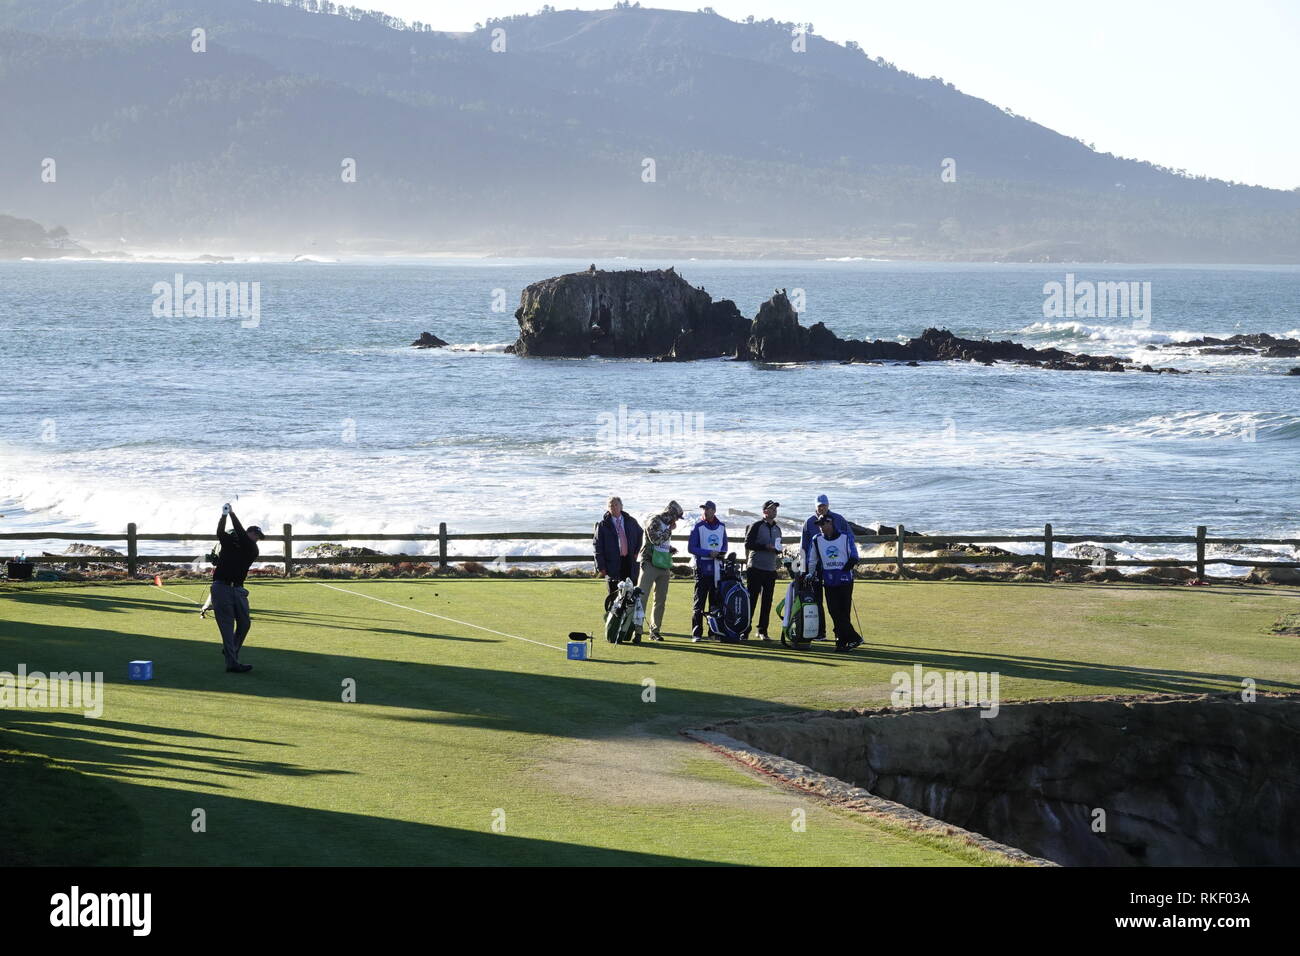 Pebble Beach Golf Links, California, USA. 11th February, 2019  Pebble Beach Golf Links, CA, USA Phil Mickleson drives on the 18th tee watched by Paul Casey during the Monday finish final round at Pebble Beach Golf Course at  the AT&T Pro-Am at Pebble Beach Credit: Motofoto/Alamy Live News Stock Photo